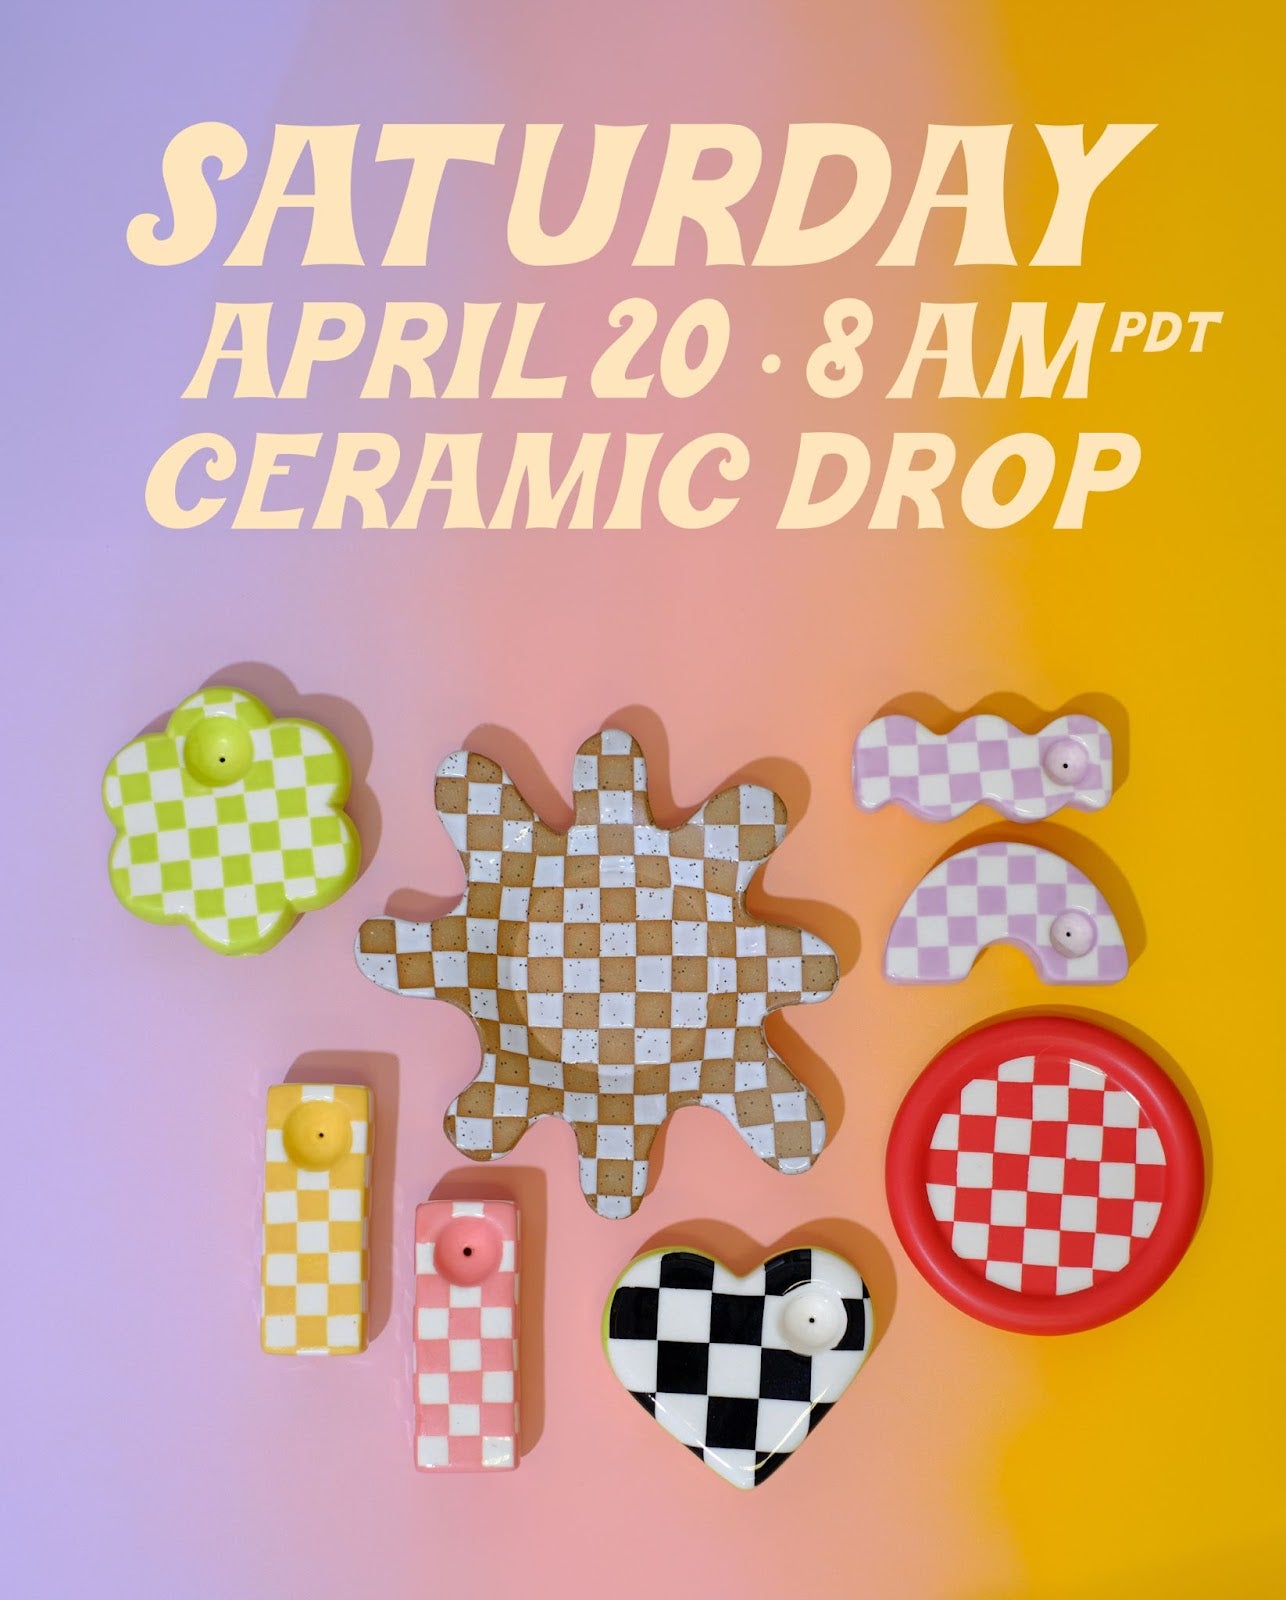 checkered ceramics by sleepy mountain coming this saturday 4/20